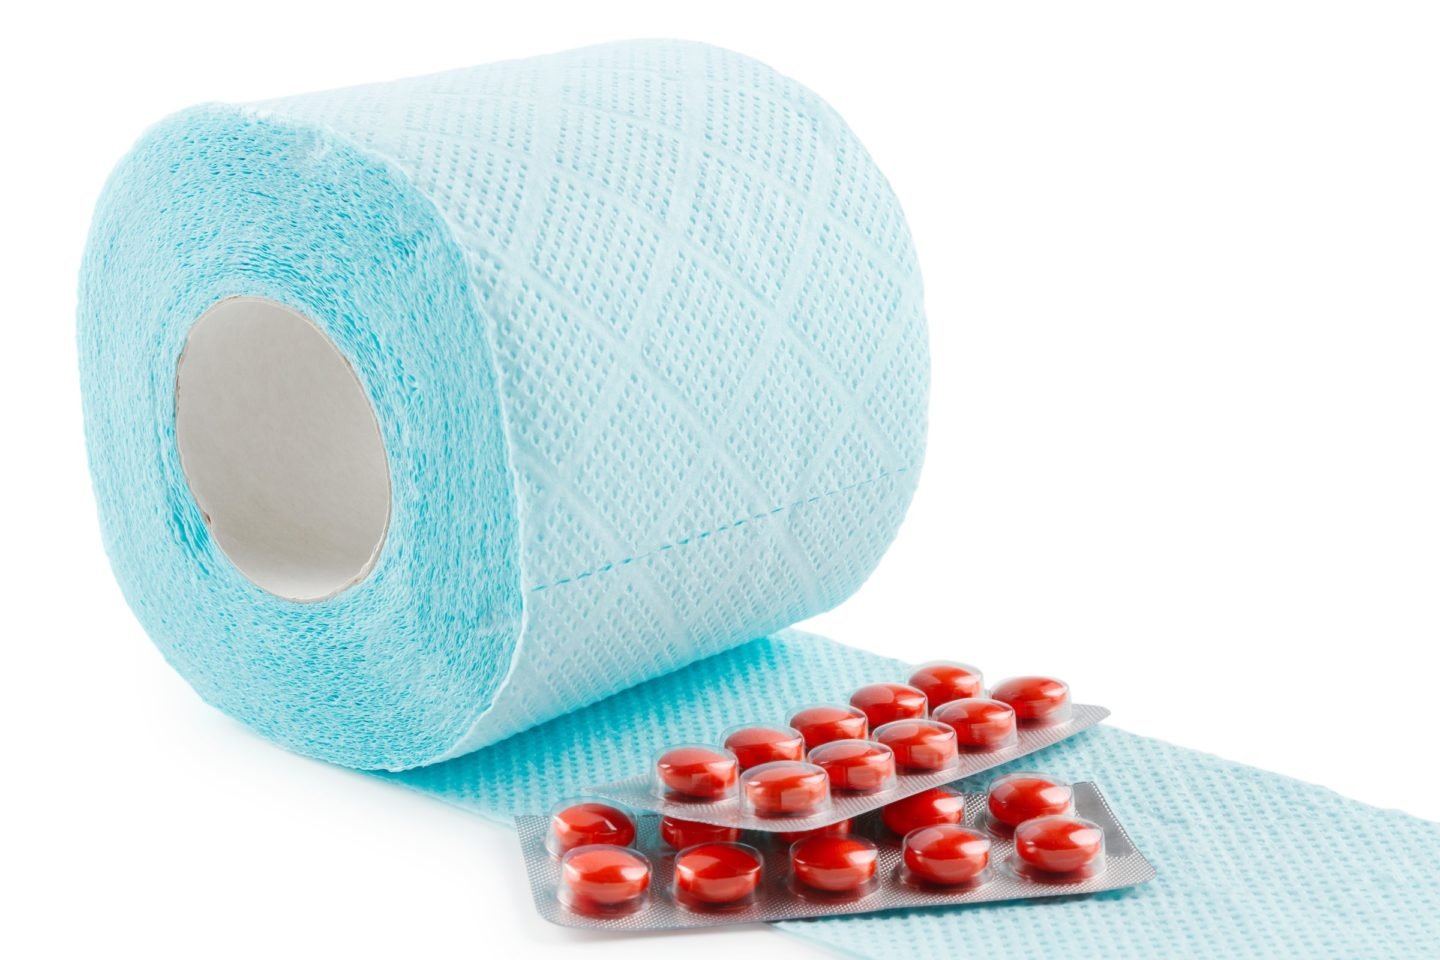 Antihypertensive Drugs Can Cause Constipation